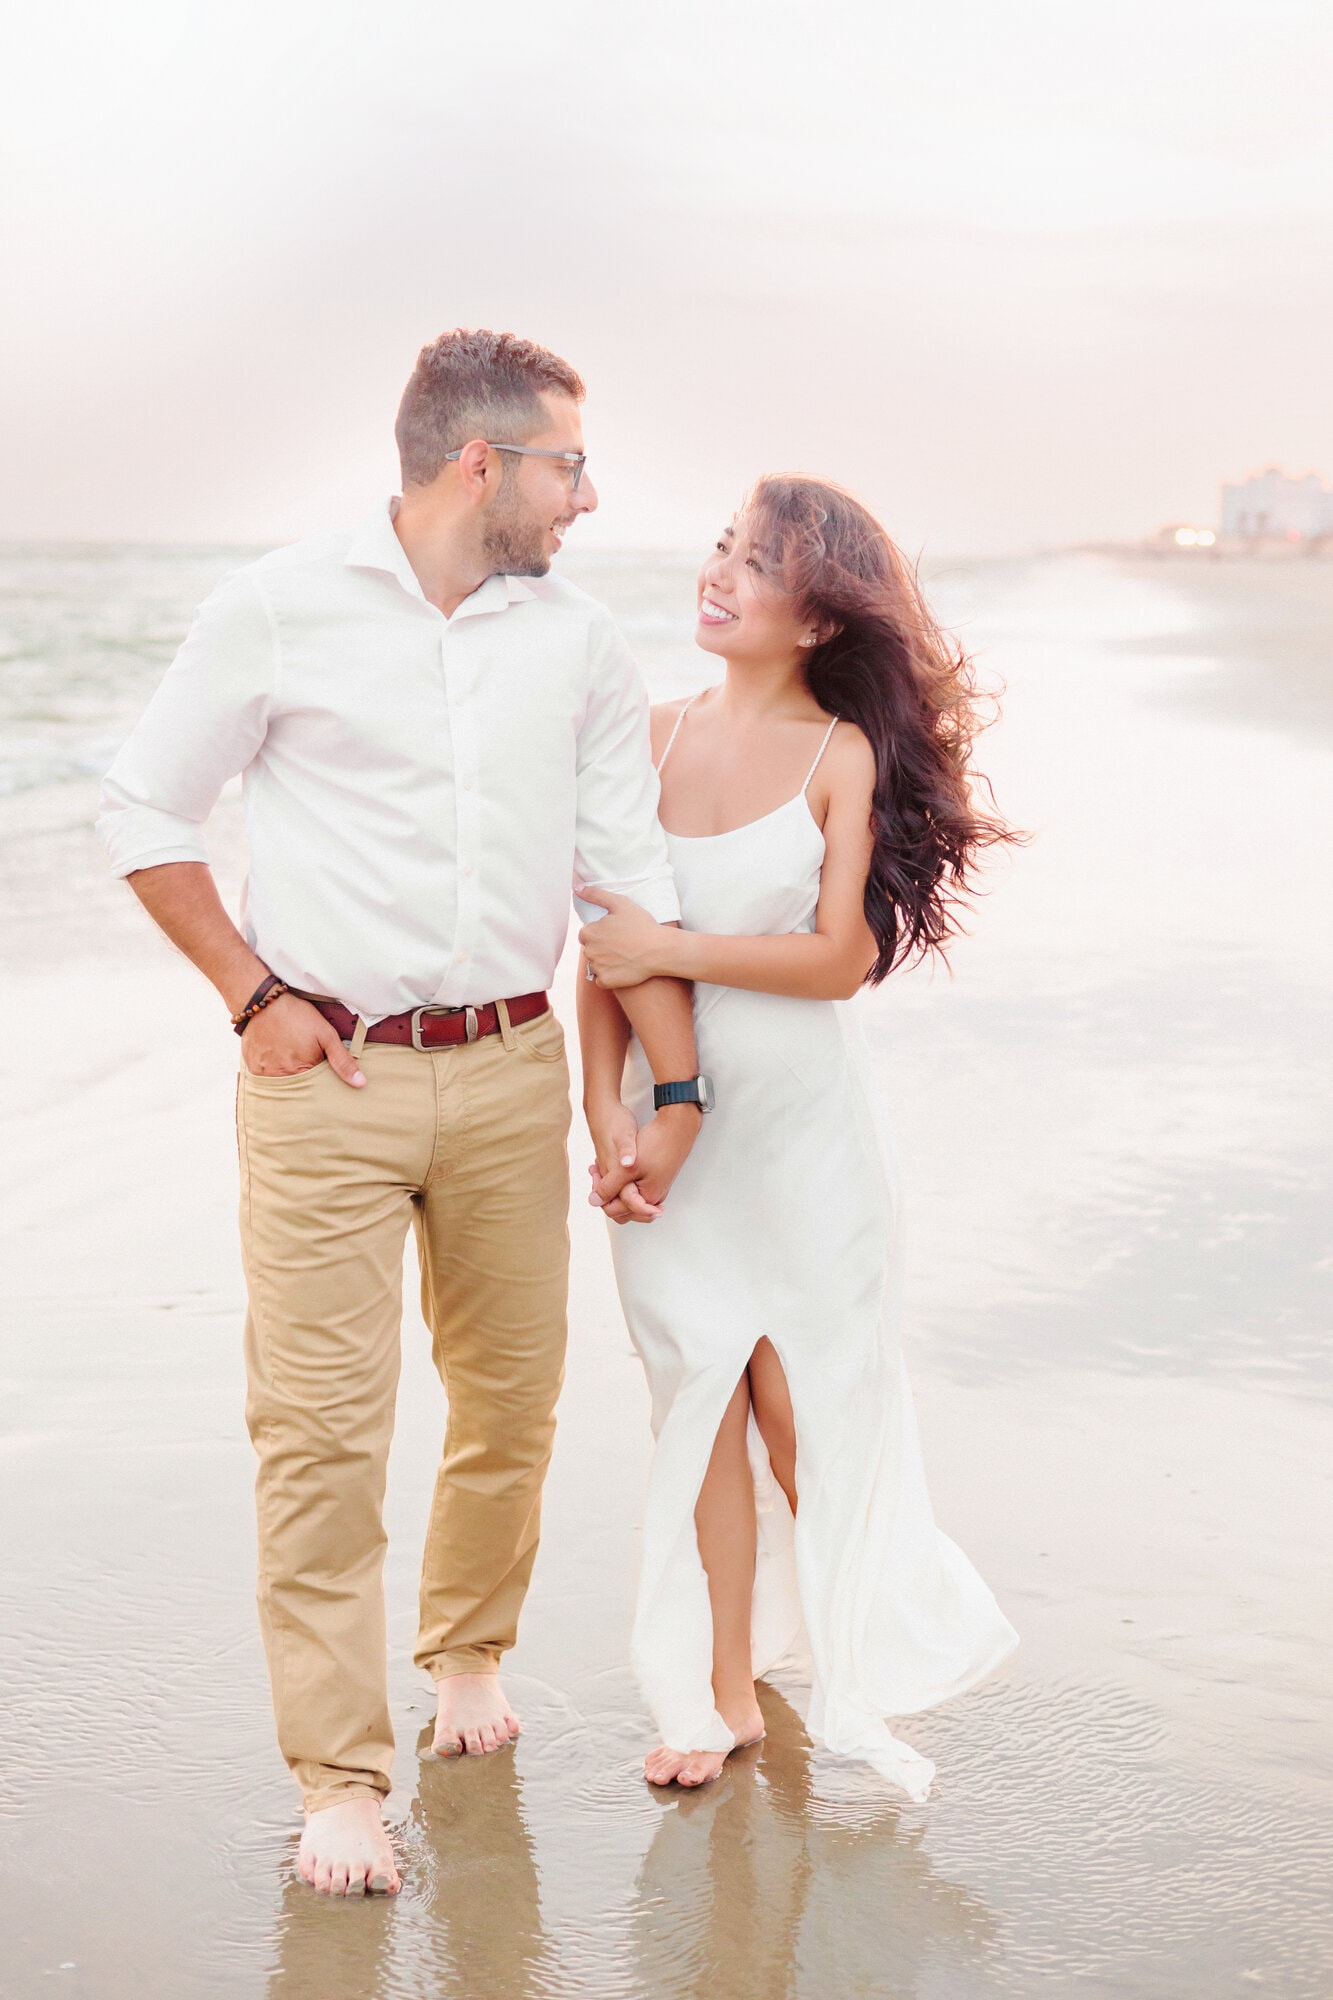 Engagement pictures at the beach with the couple walking hand in hand next to the water.